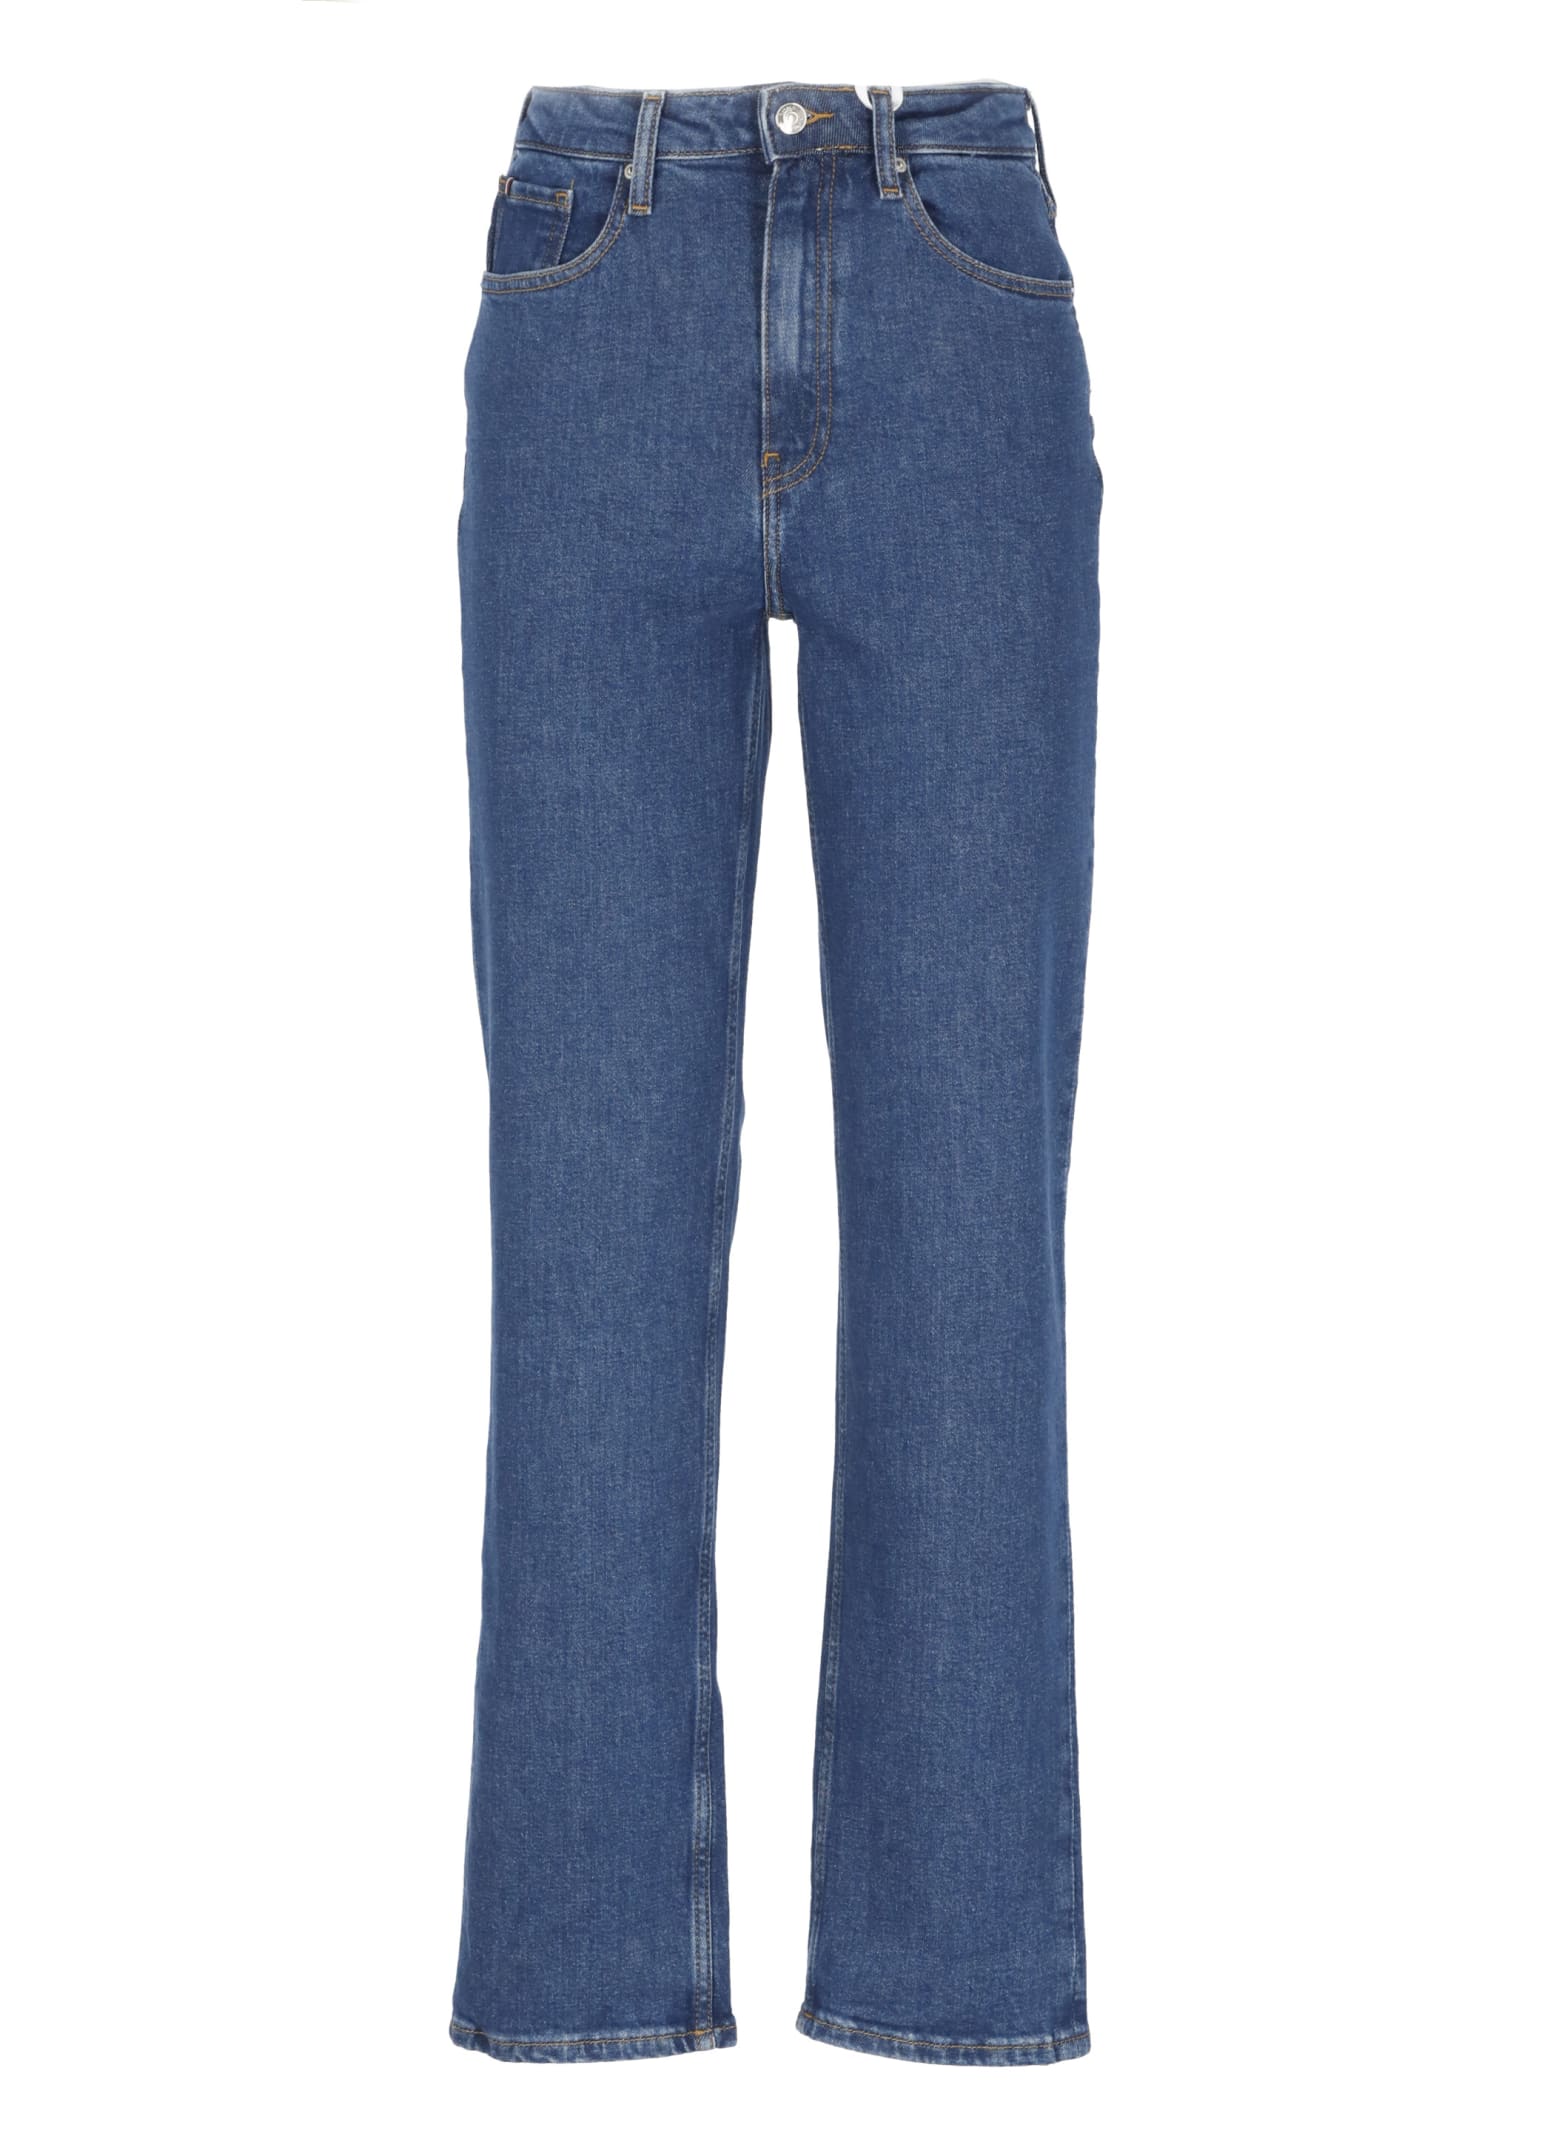 Tommy Hilfiger High Waisted Jeans